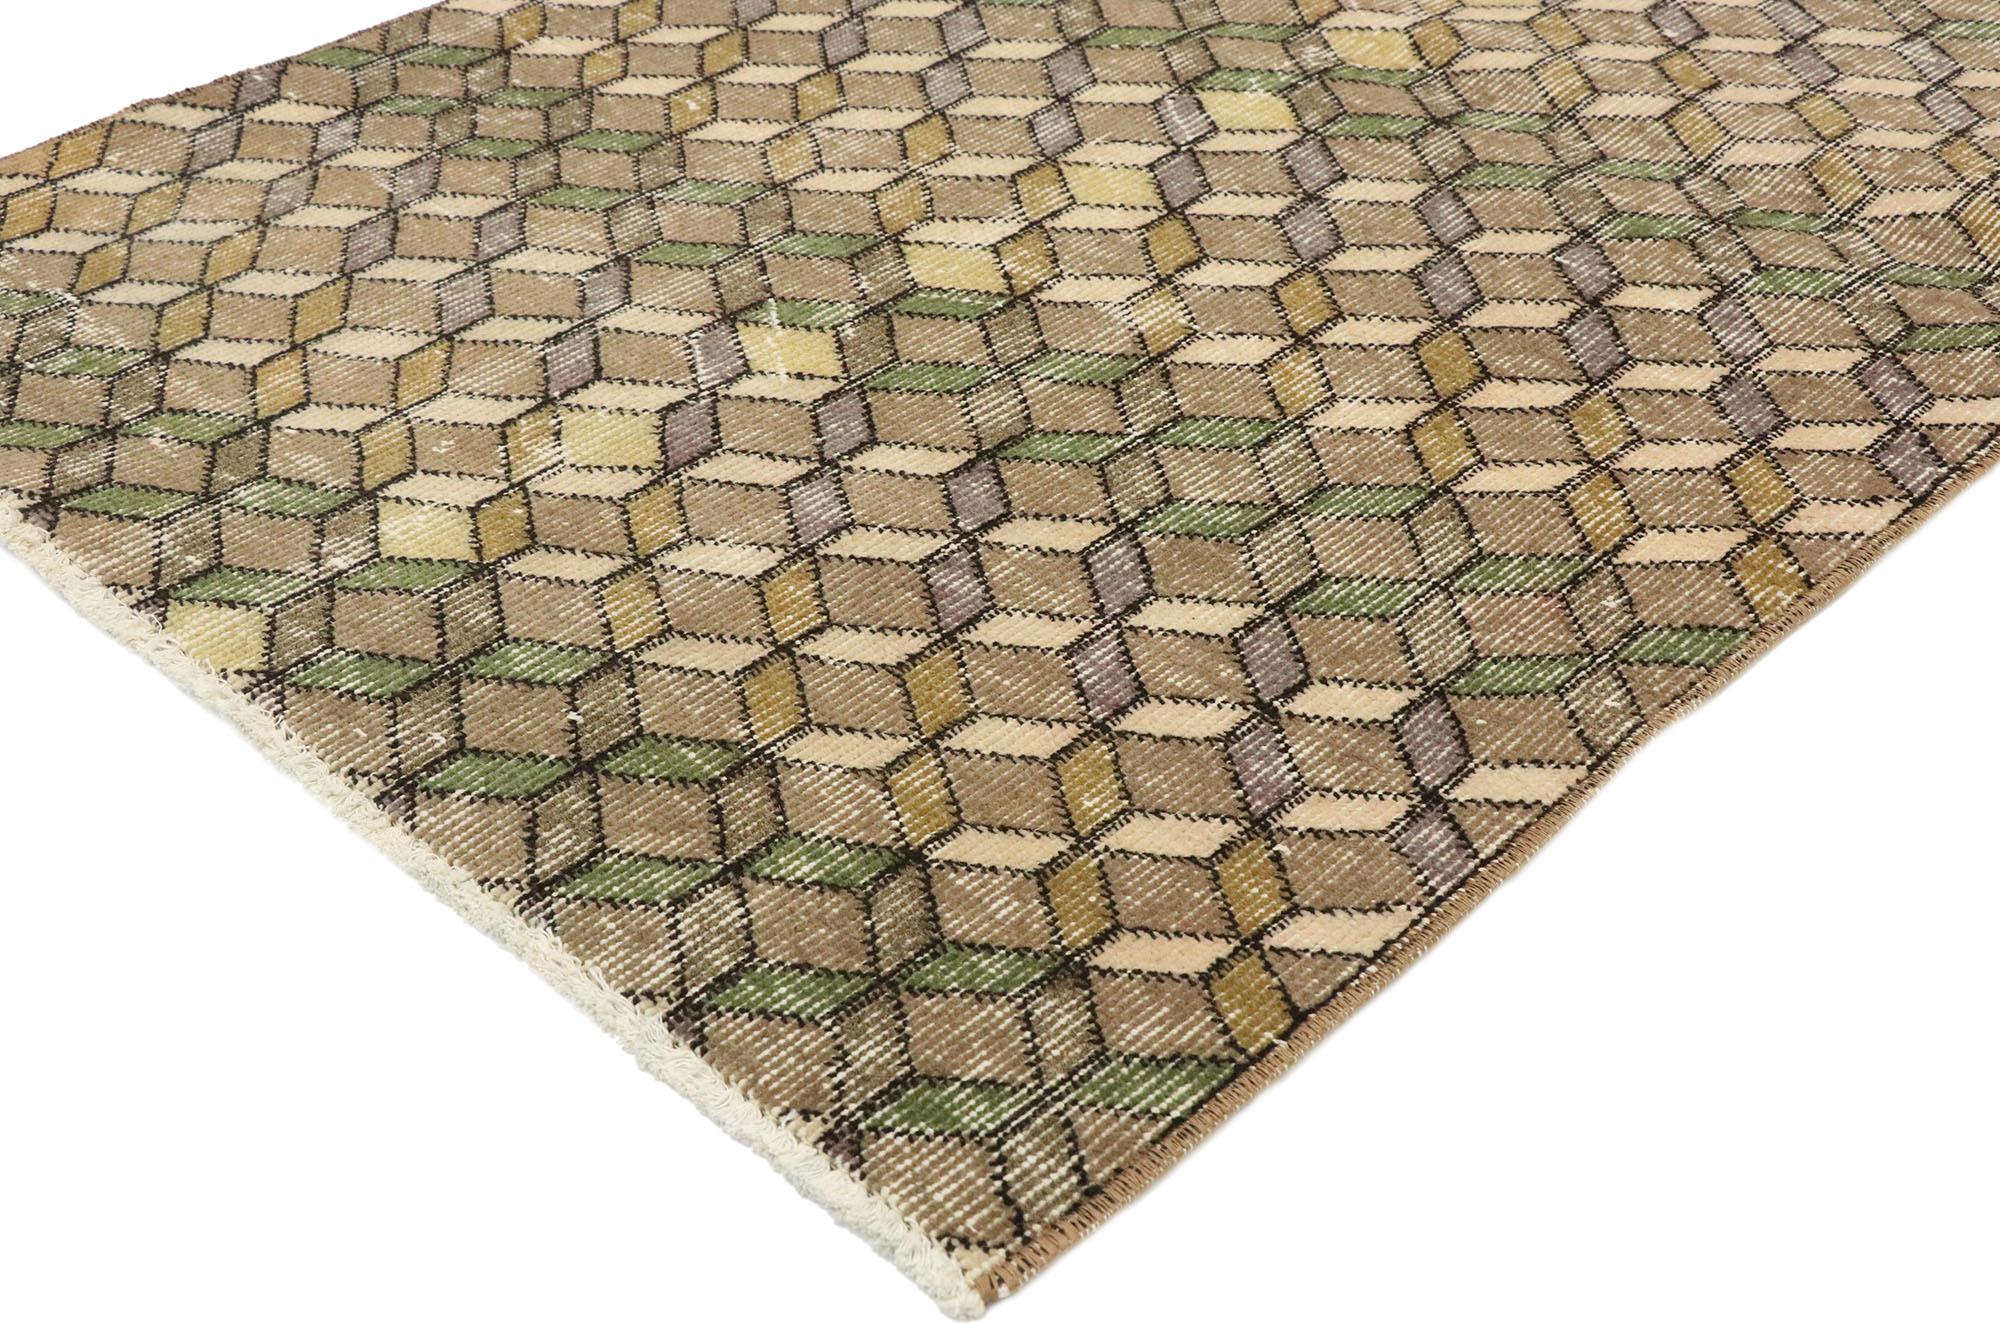 51894, distressed vintage Turkish Sivas rug with Modernist Bauhaus Industrial style. This hand knotted wool distressed vintage Sivas rug features a geometric all-over diamond lattice pattern overlaid across an abrashed field. The latticework is